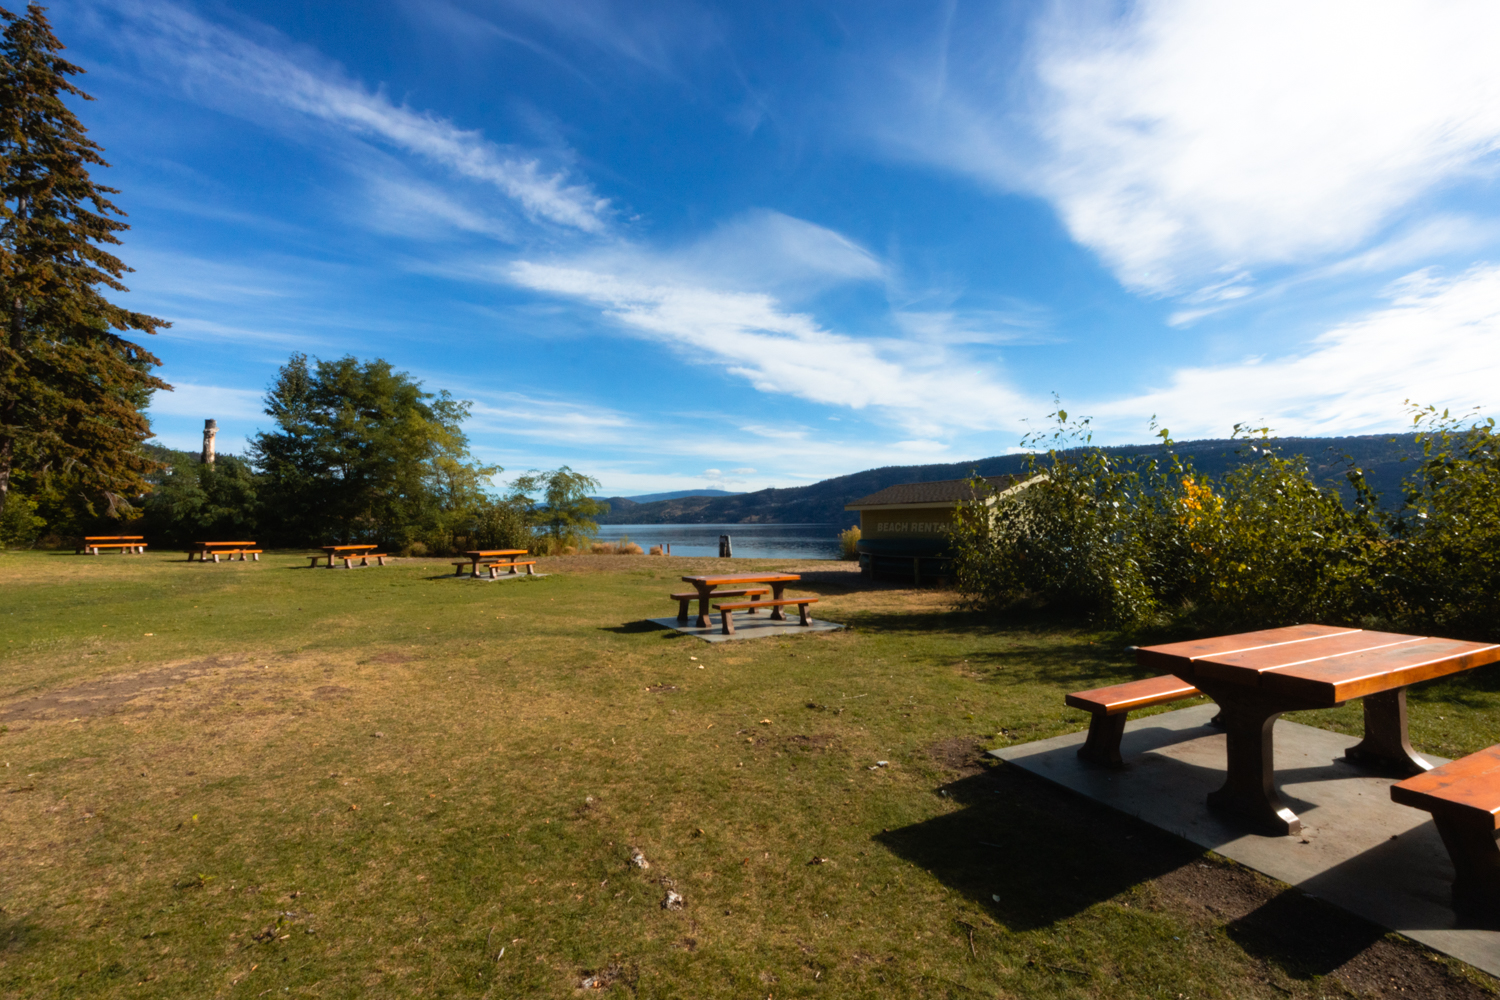 Picnic benches at the day-use area of Bear Creek Provincial park on the shores of Okanagan Lake